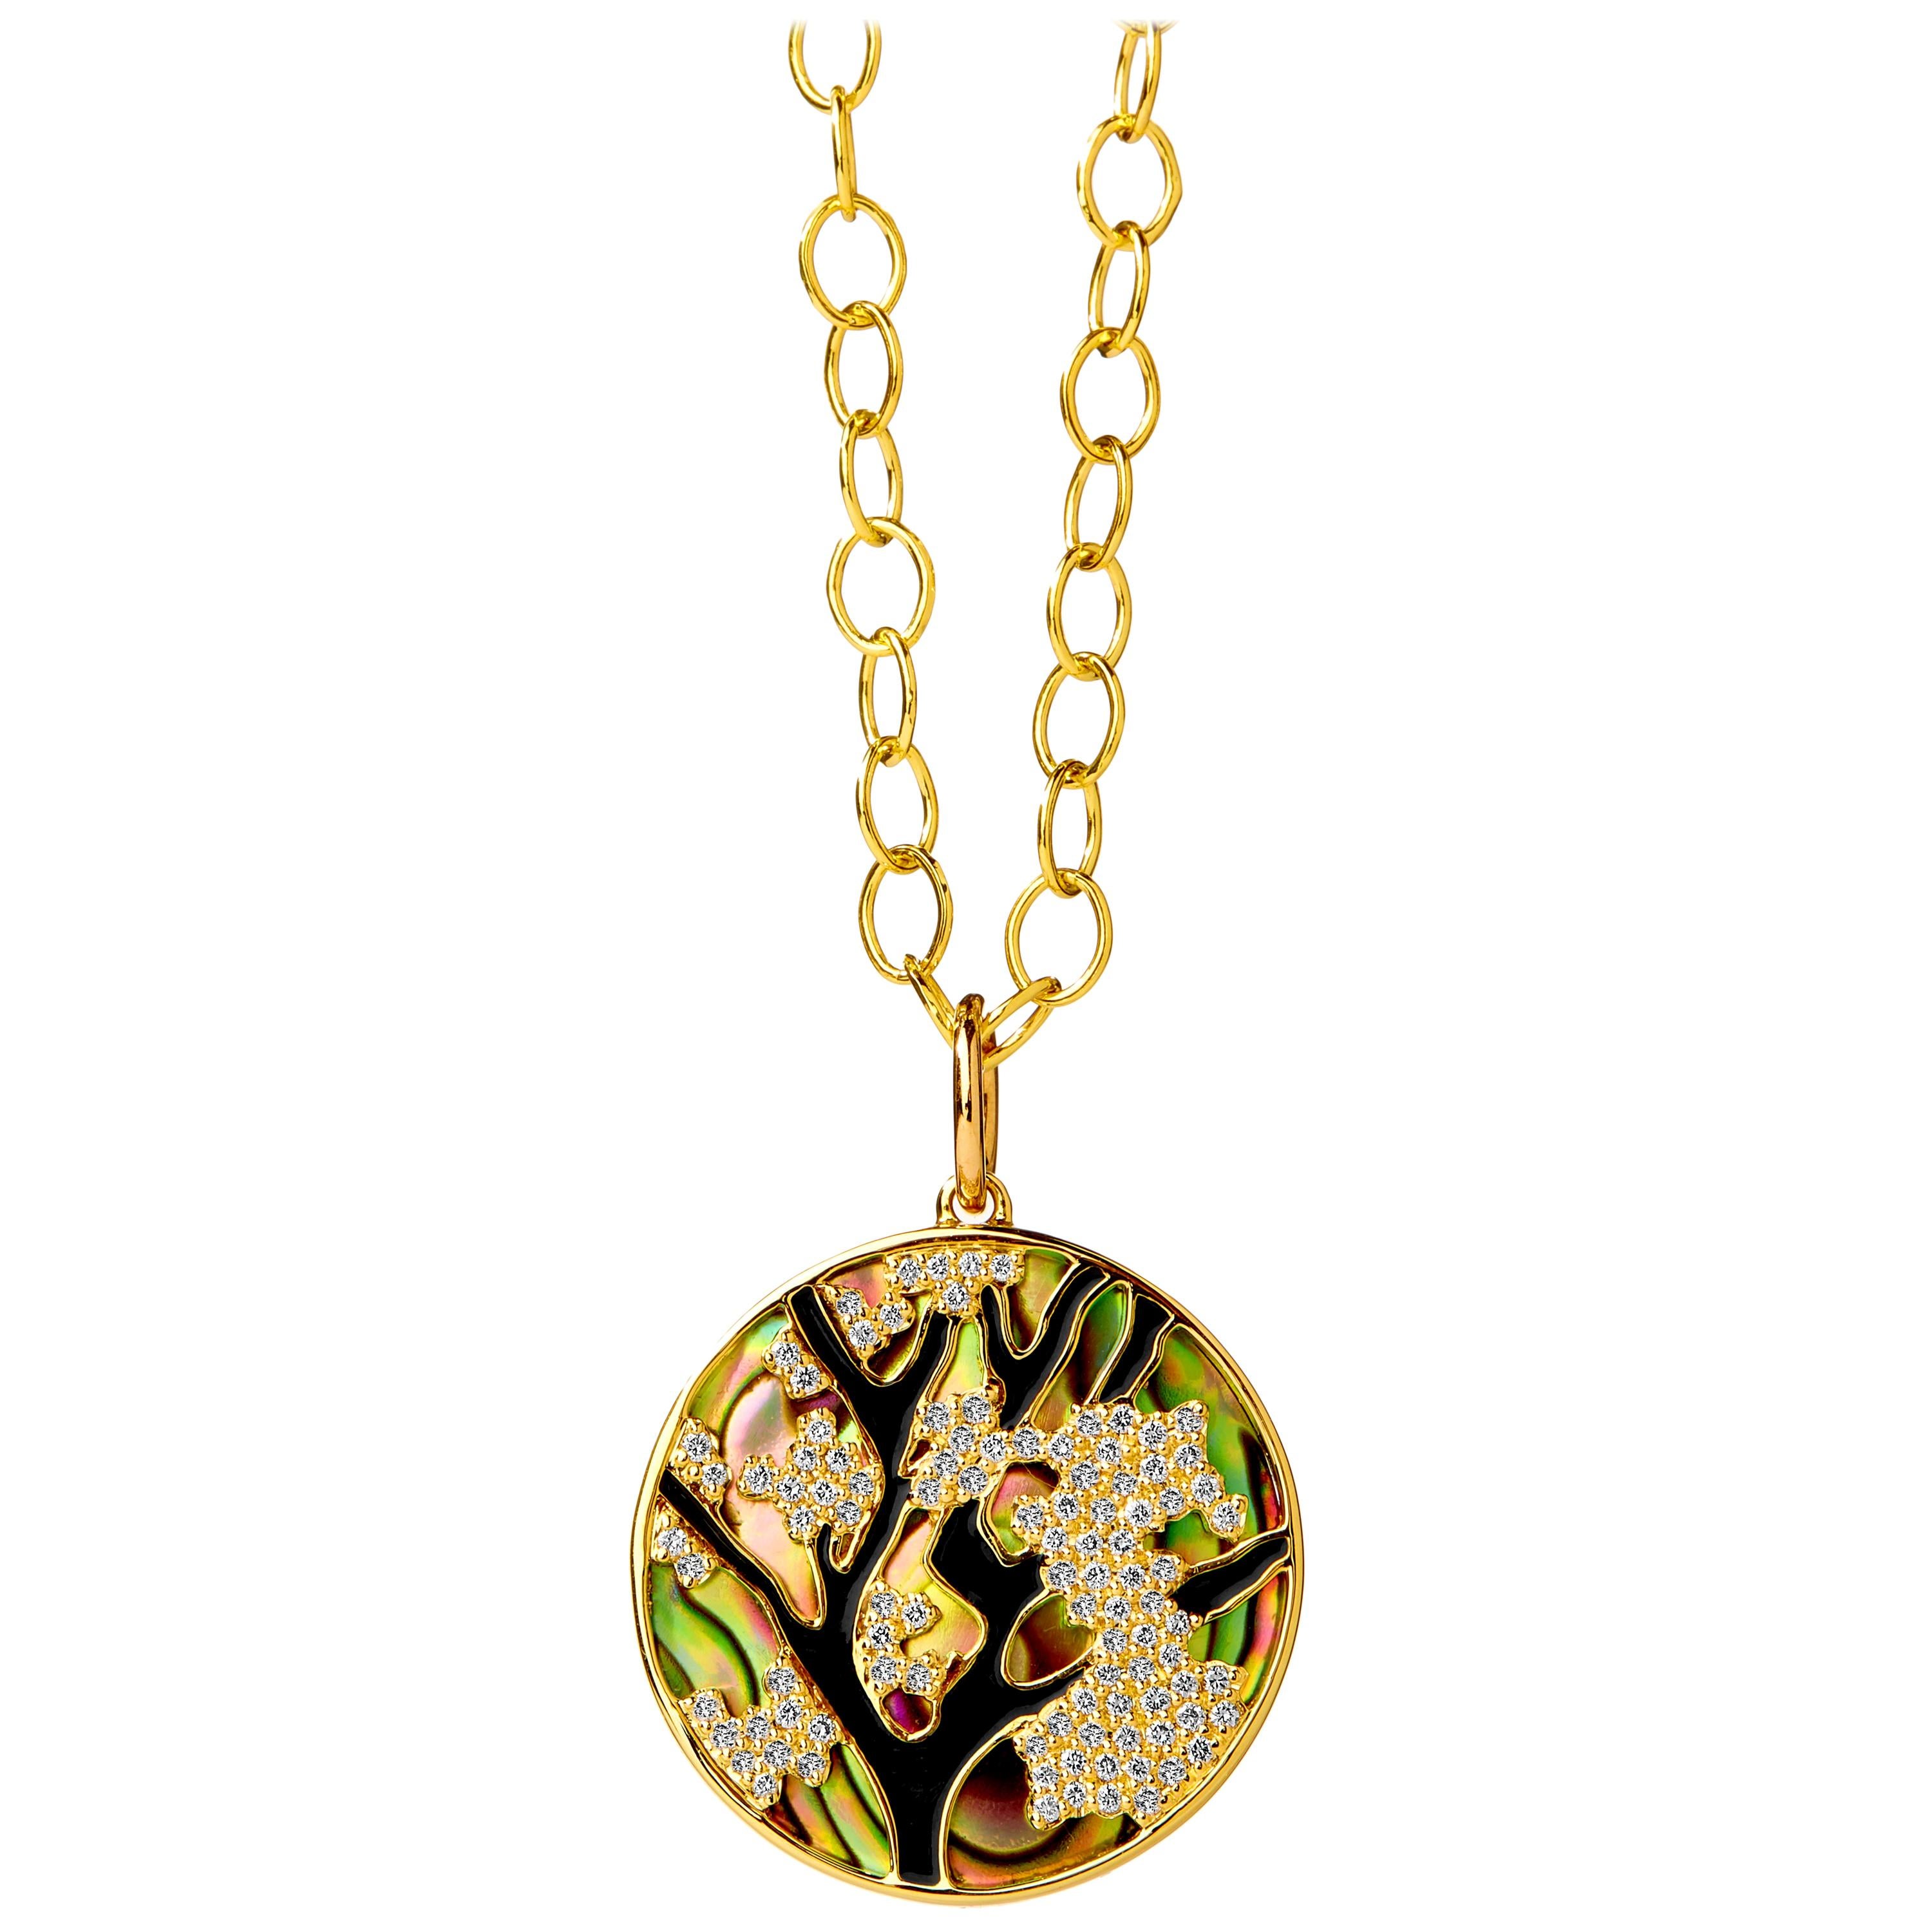 Syna Yellow Gold Abalone Pendant with Black Enamel and Champagne Diamonds